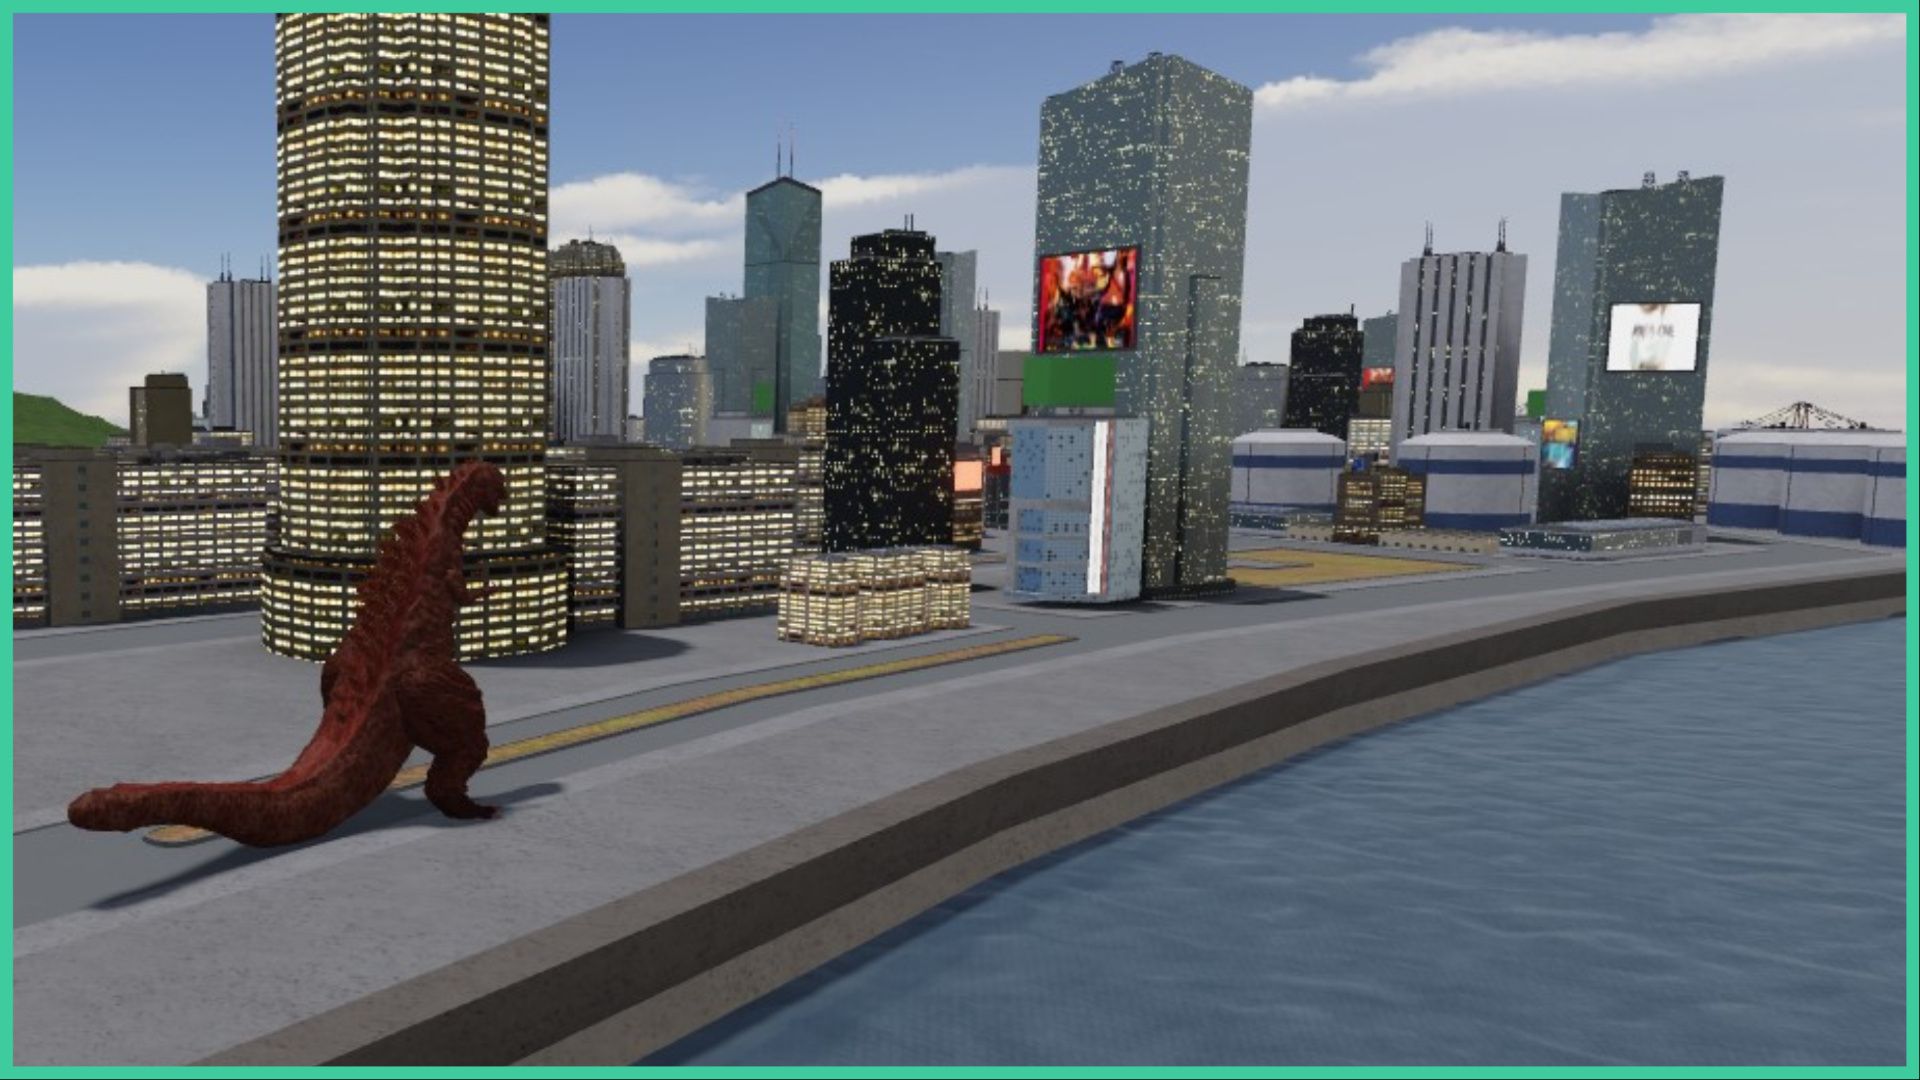 feature image for our kaiju arisen codes guide, it's a screenshot from the game of a kaiju walking towards some skyscraper buildings in the city with a river to the right side, some of the skyscrapers have screens on the front with advertisements